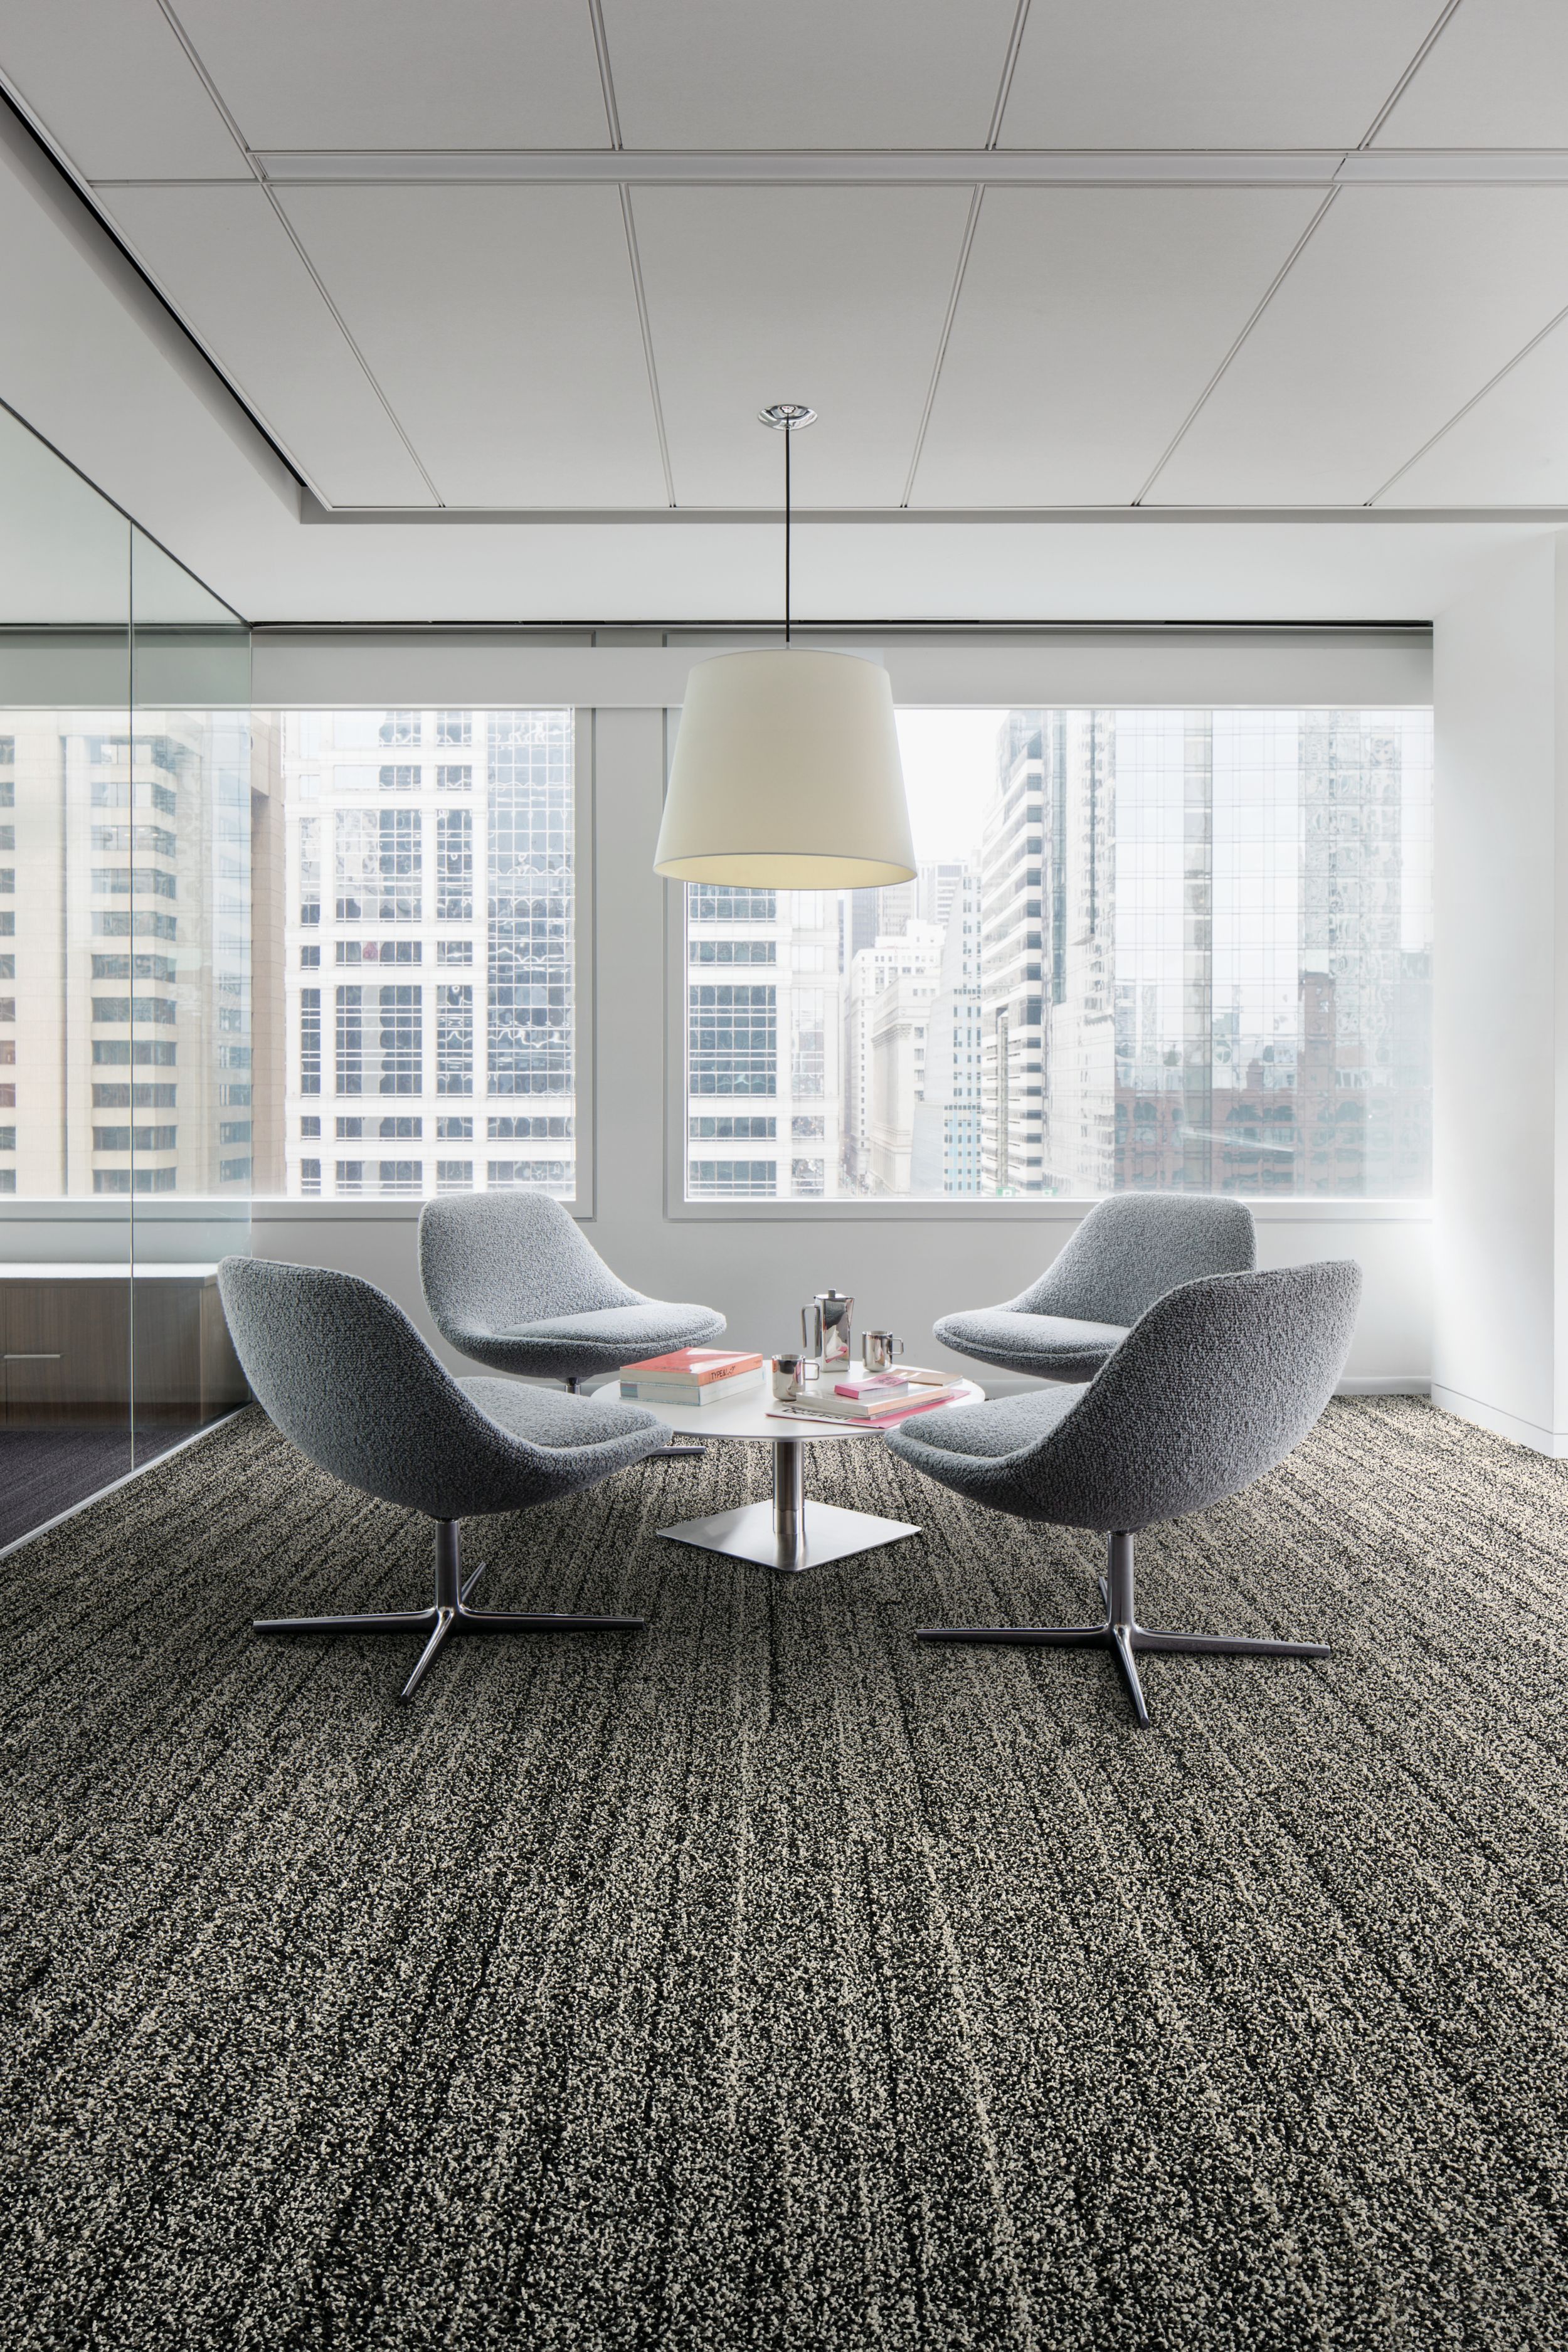 Interface Overedge plank carpet tile with fabric chairs around round table número de imagen 2